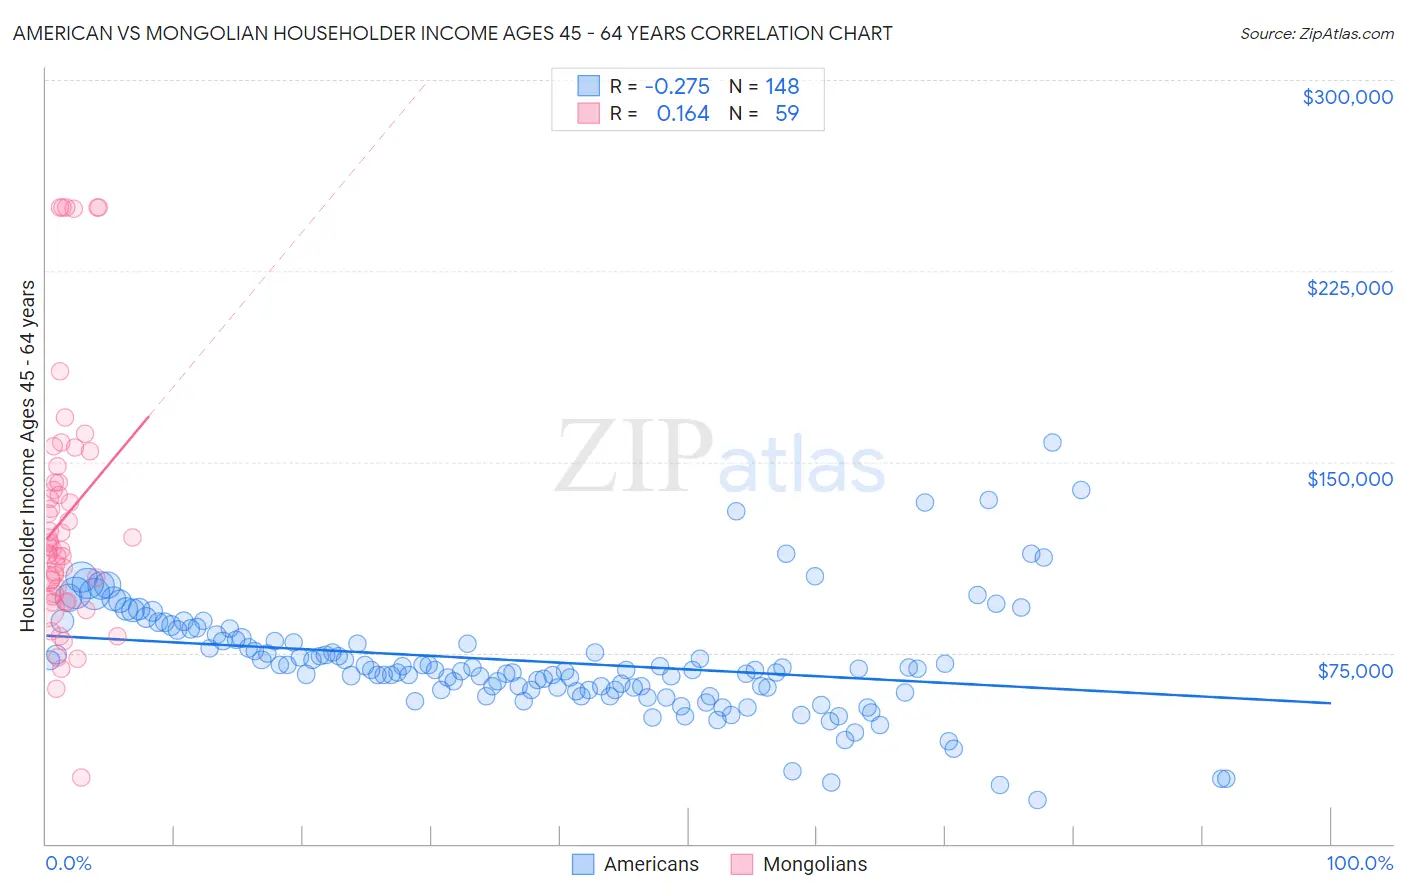 American vs Mongolian Householder Income Ages 45 - 64 years